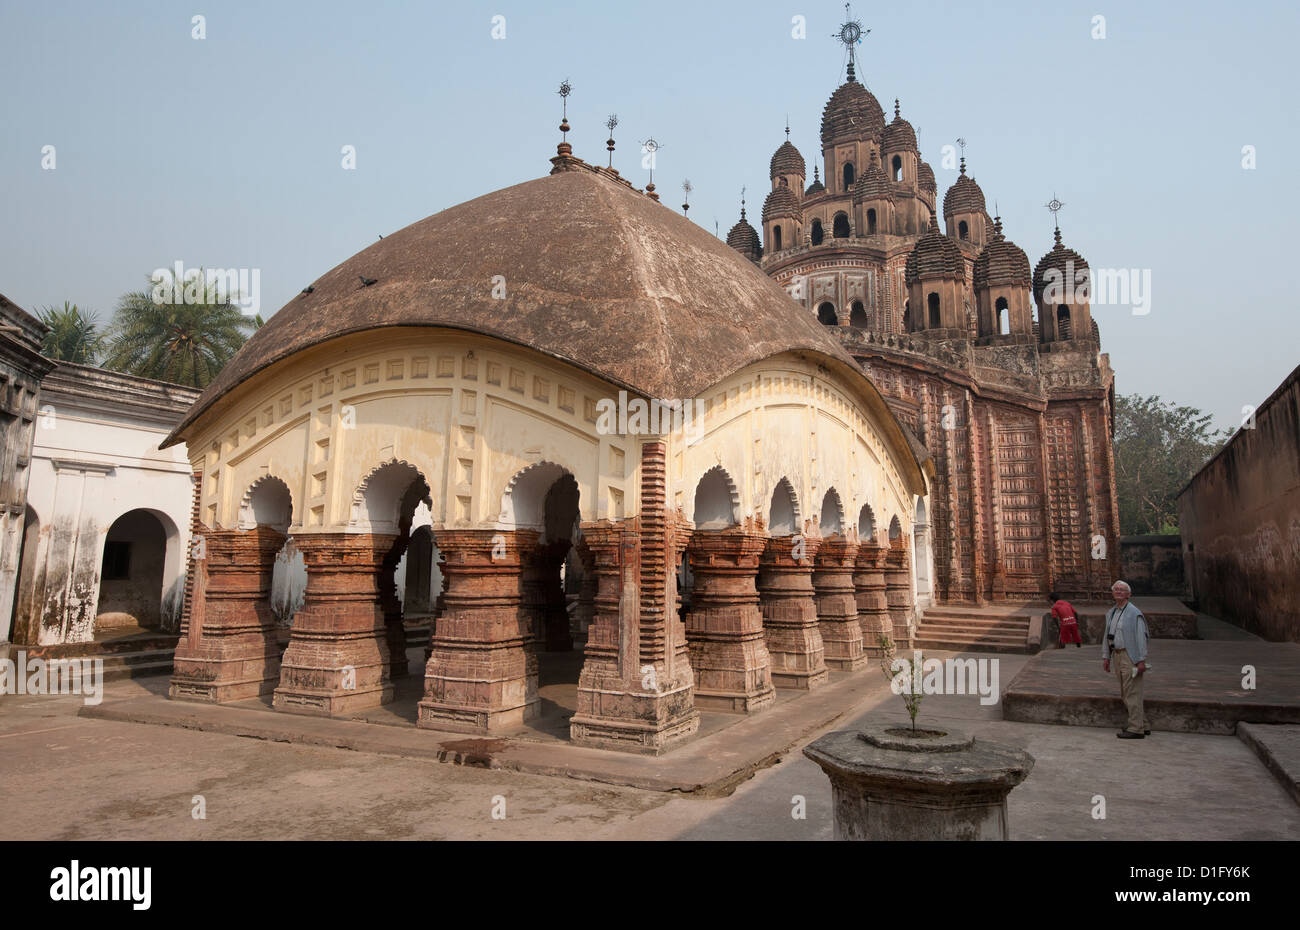 Lalji Mandir dating from 1739 with its 25 steeples, in terracotta temple complex, Kalna, West Bengal, India, Asia Stock Photo